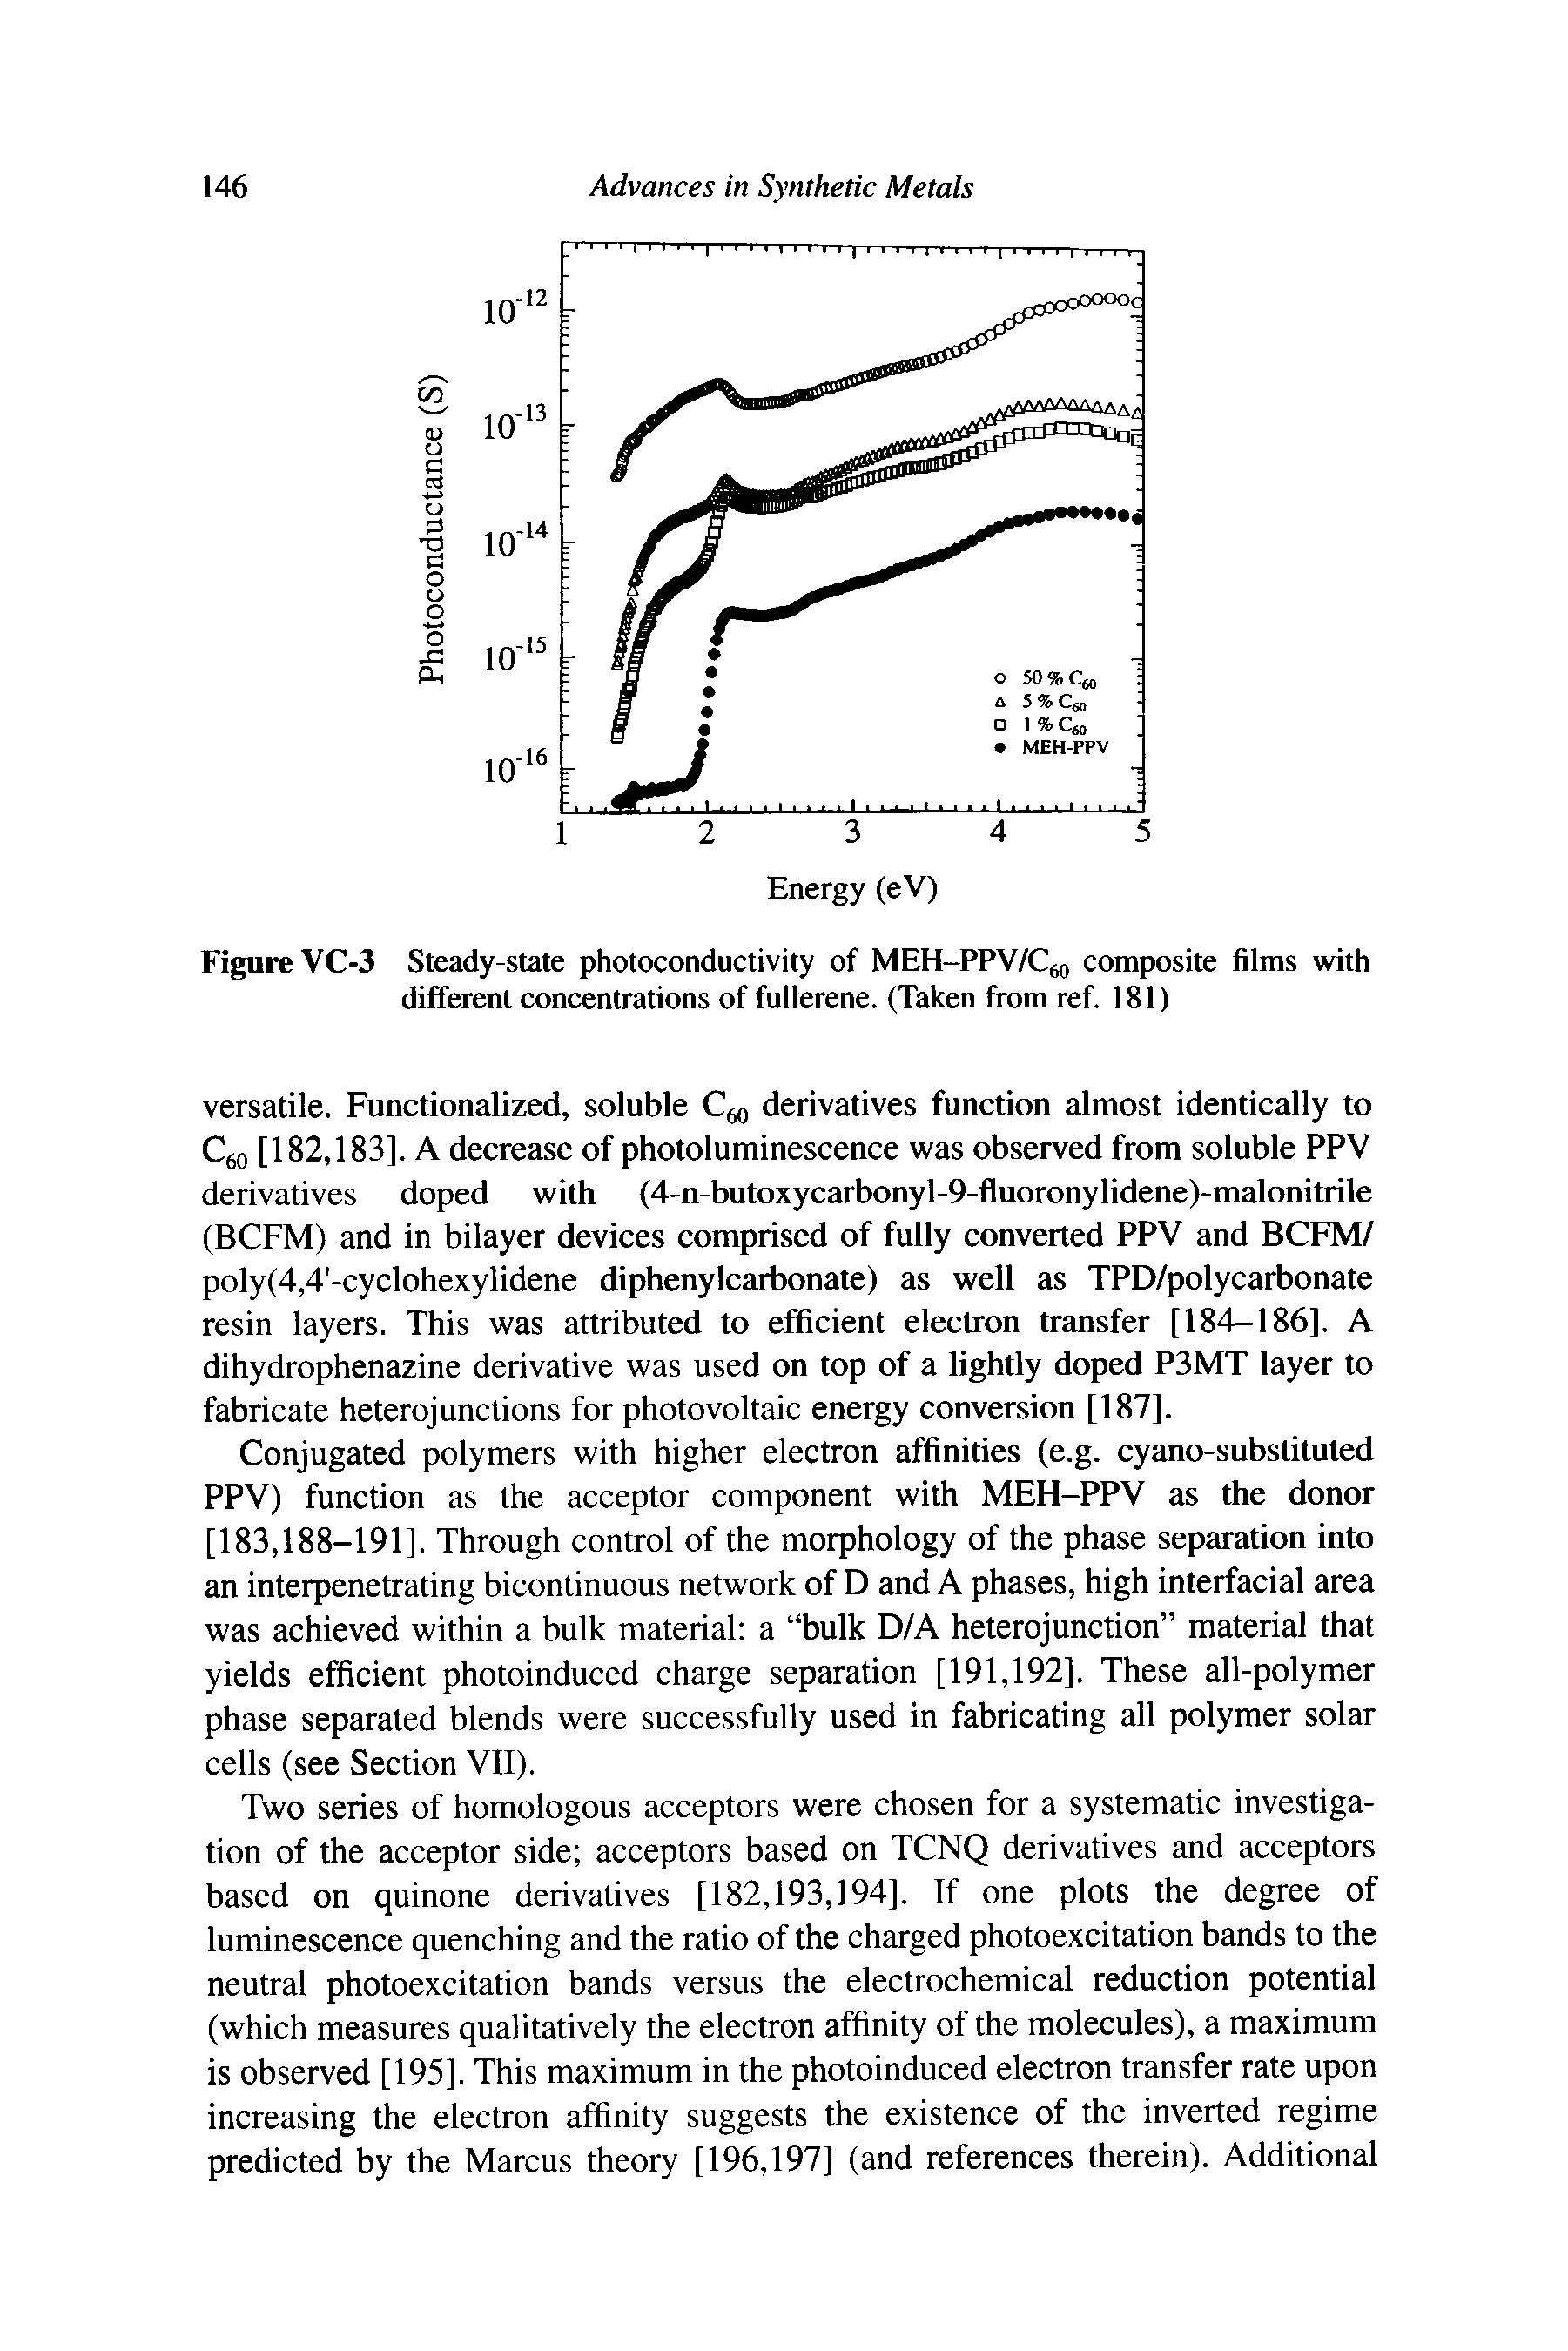 Figure VC-3 Steady-state photoconductivity of MEH-PPY/C o composite films with different concentrations of fullerene. (Taken from ref. 181)...